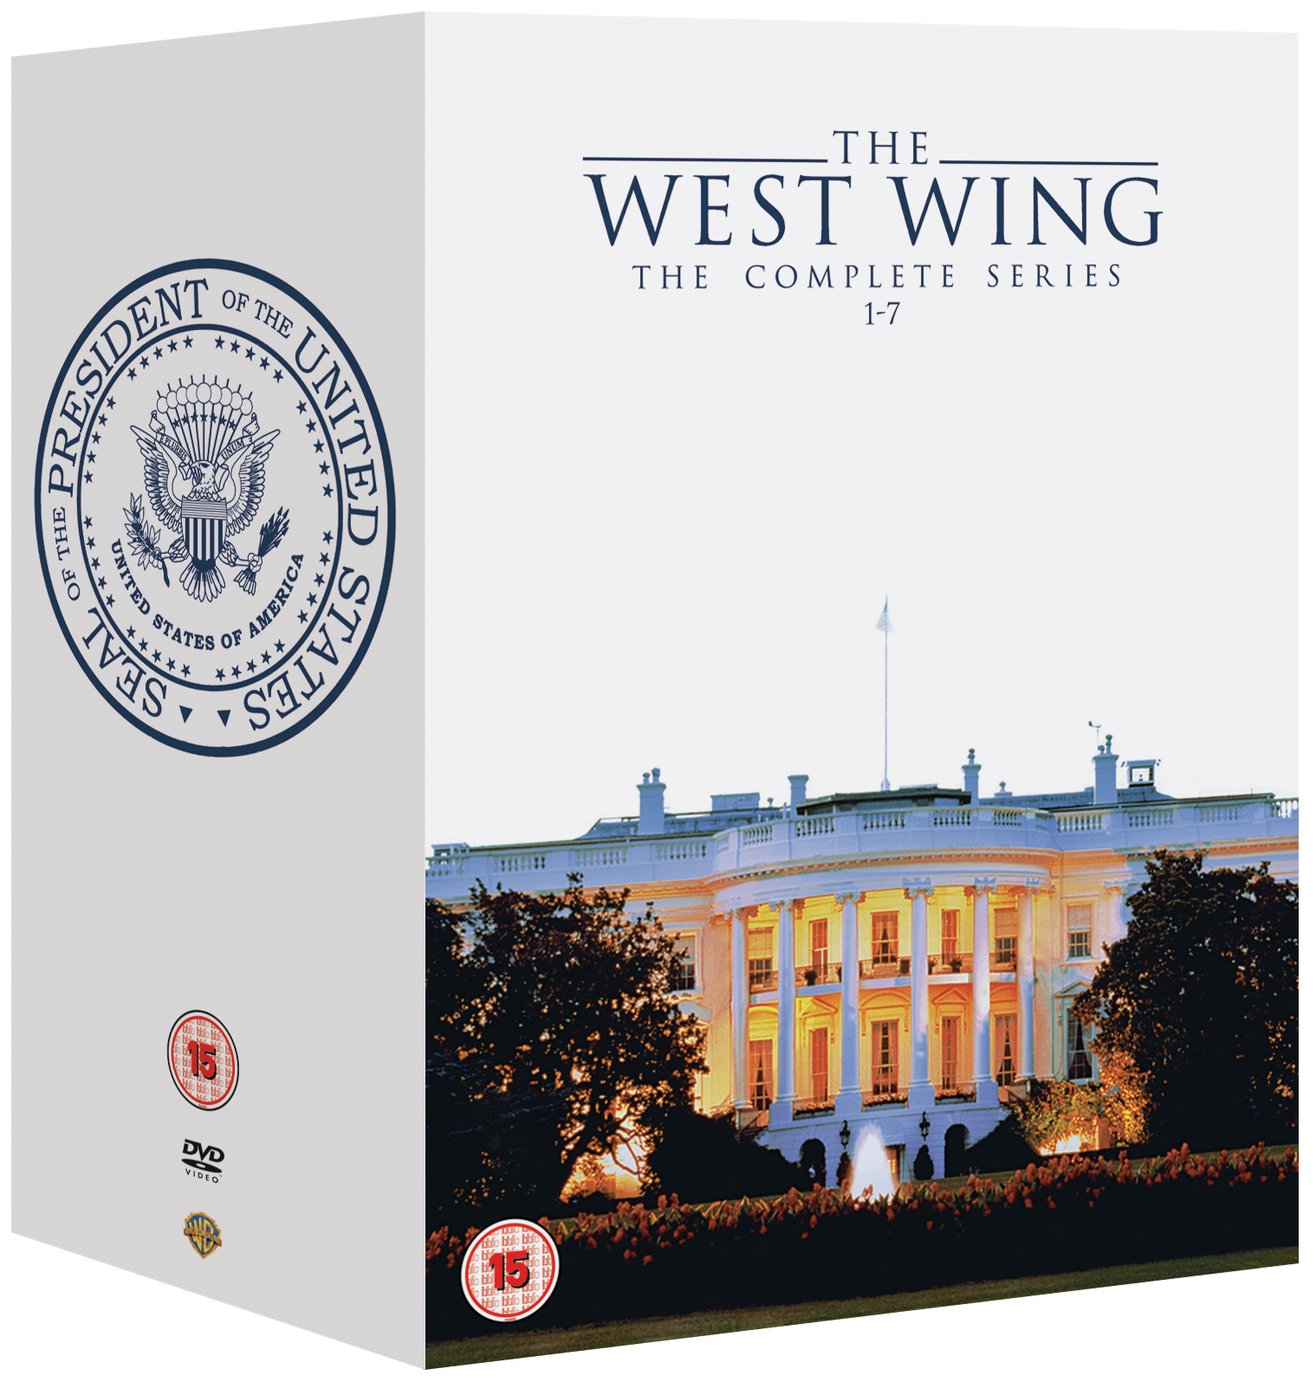 The West Wing: The Complete Series 1-7 DVD Box Set Review